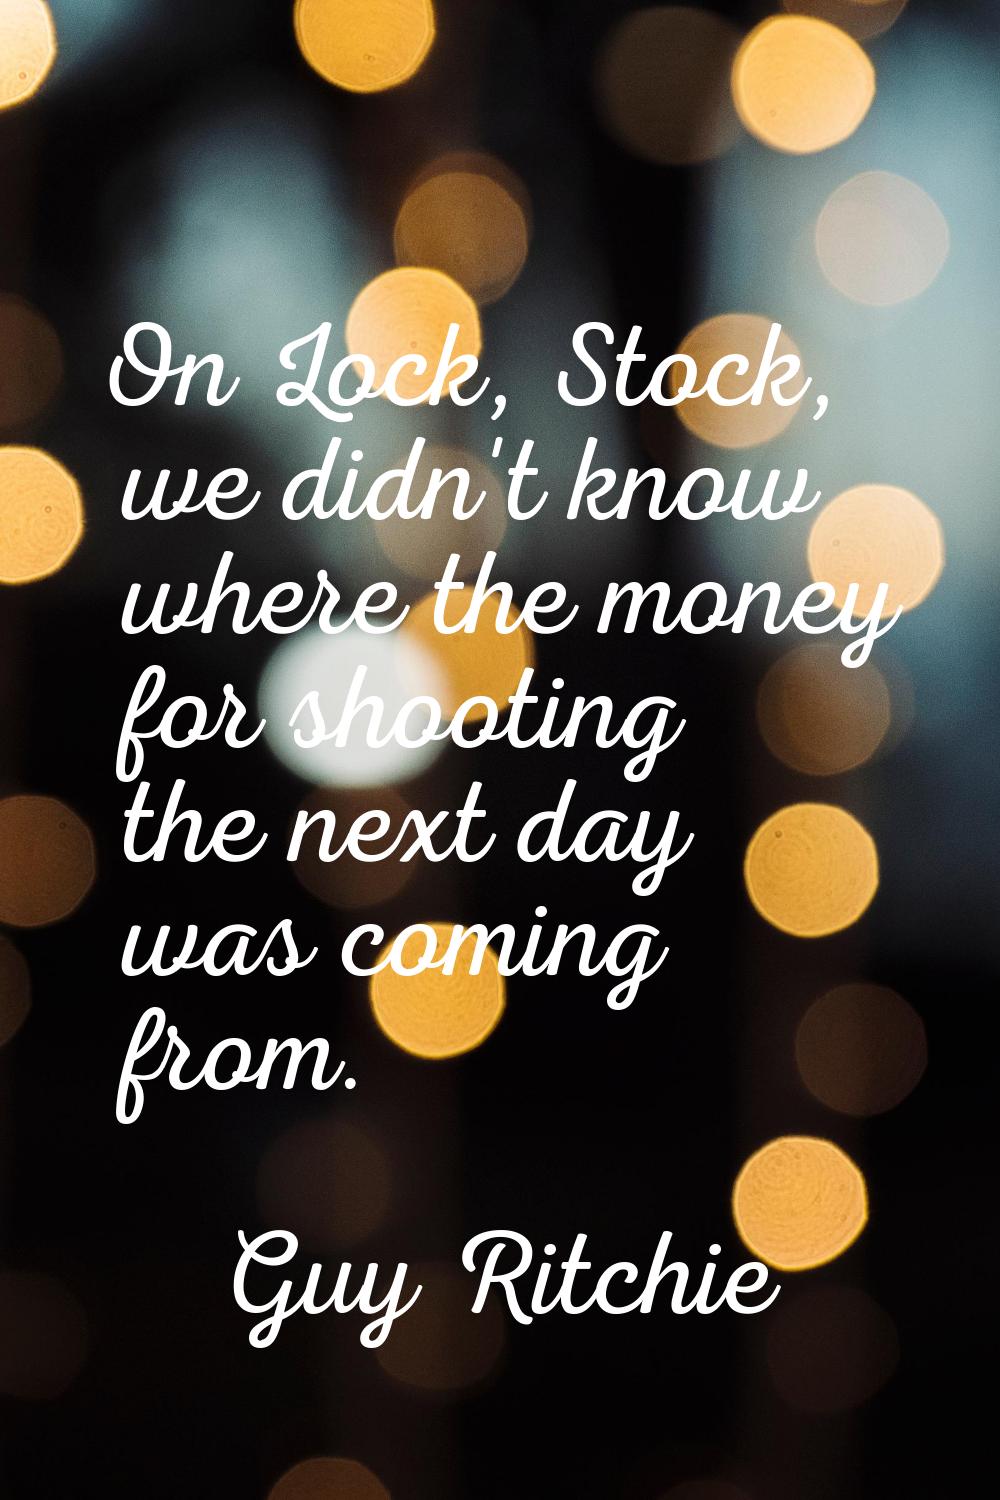 On Lock, Stock, we didn't know where the money for shooting the next day was coming from.